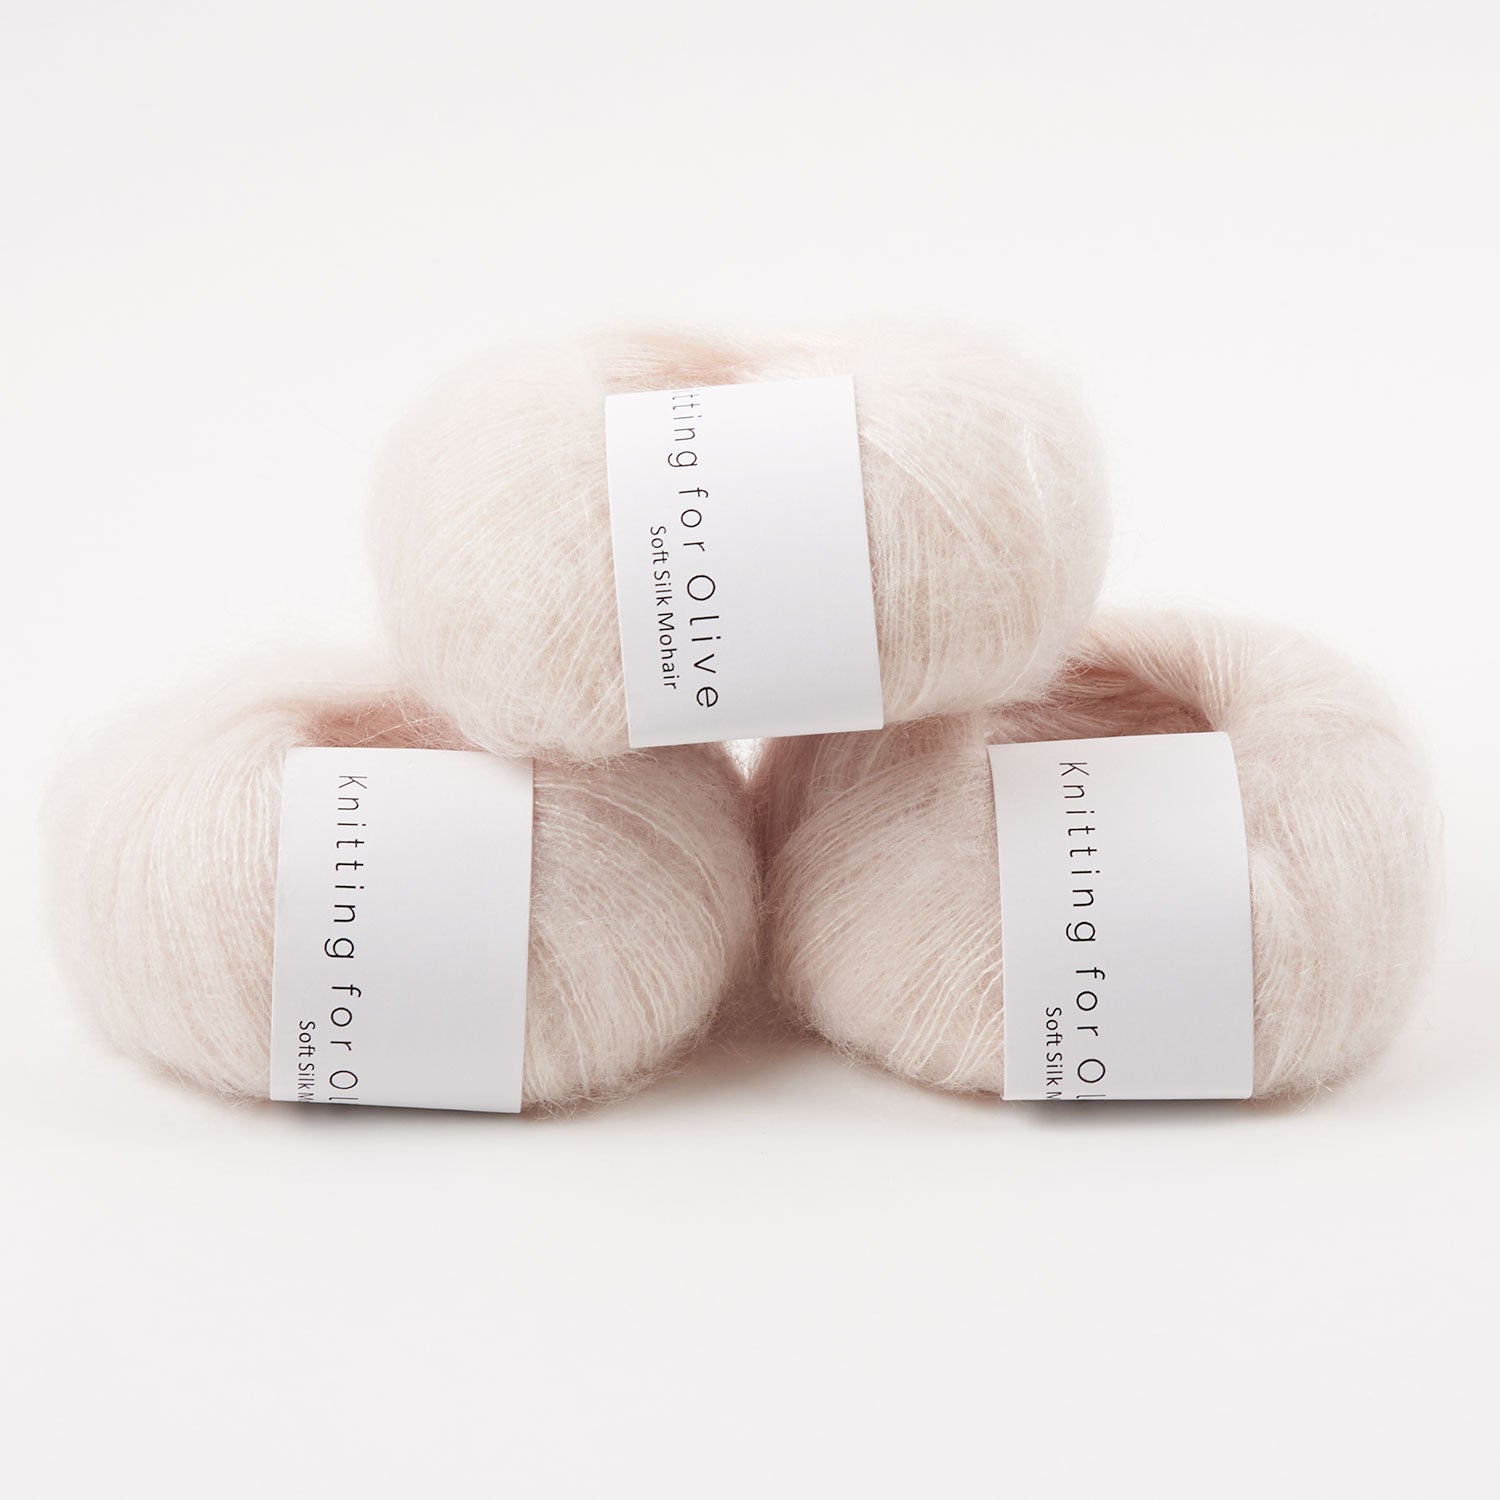 Knitting for Olive Soft Silk Mohair – Brooklyn General Store